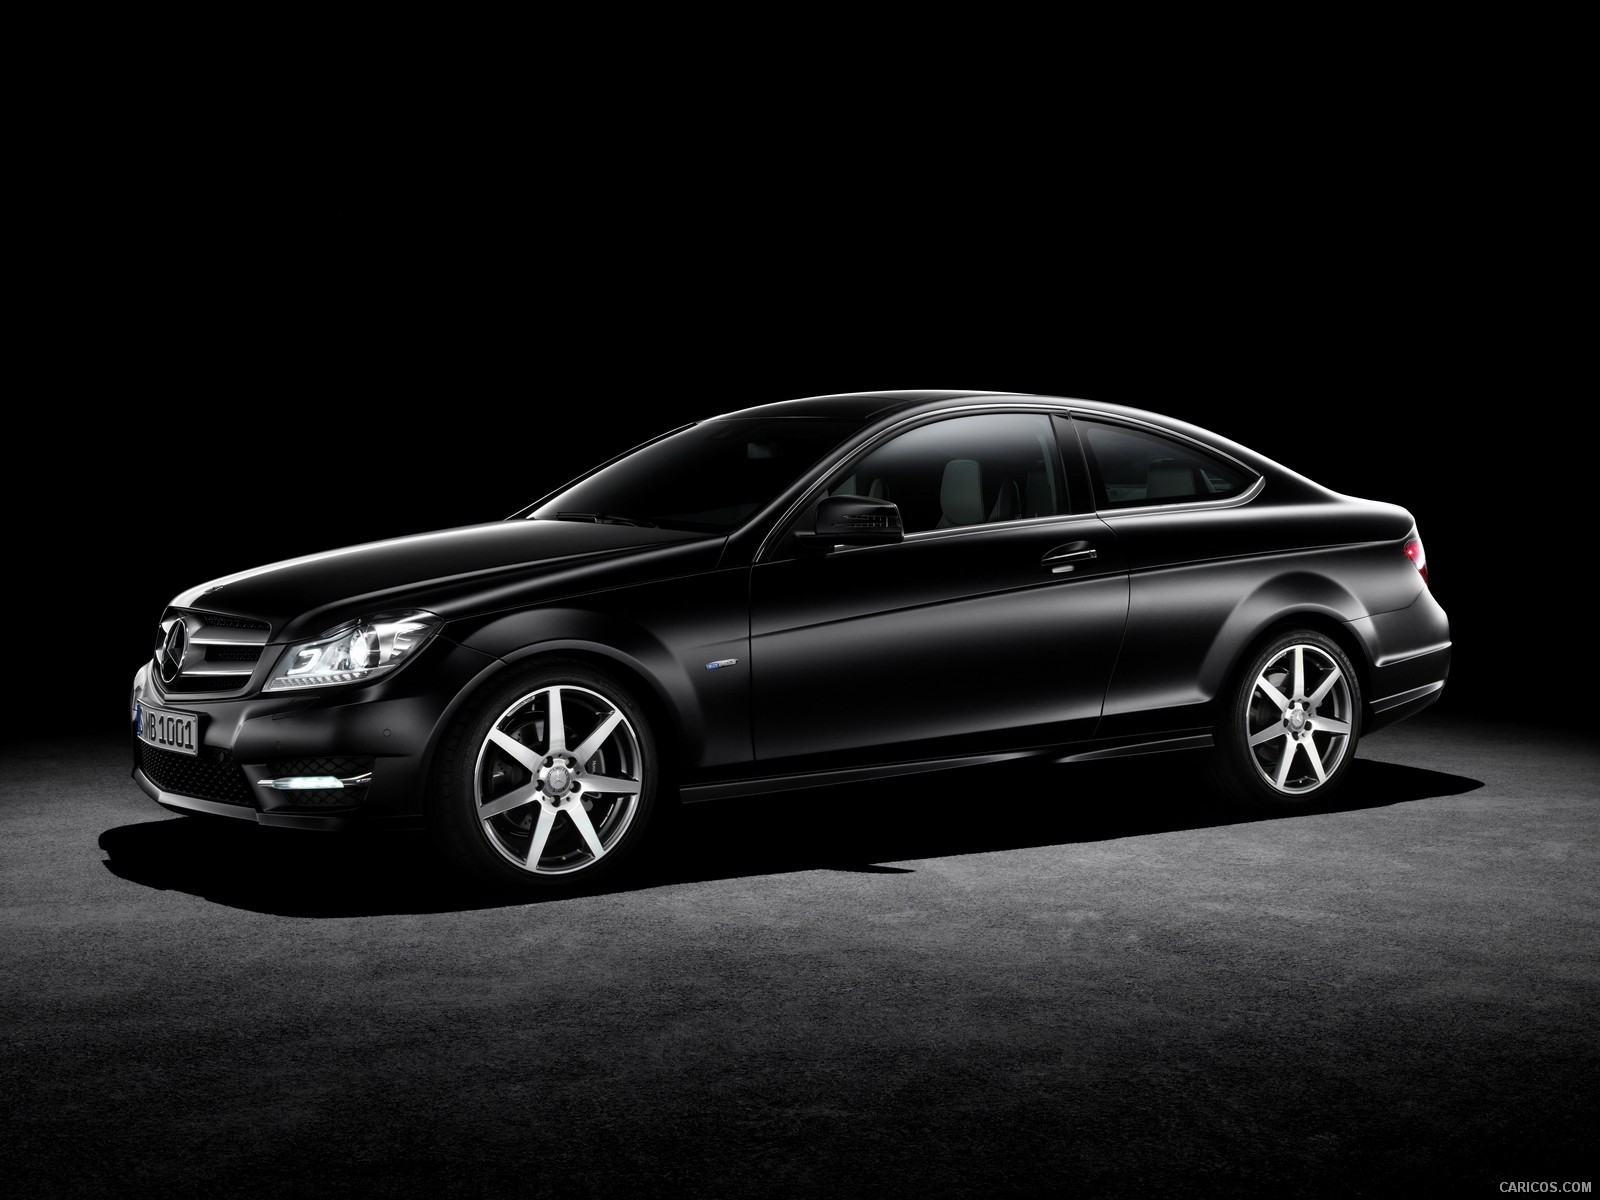 Mercedes-Benz C-Class Coupe (2012)  - Side, #27 of 79